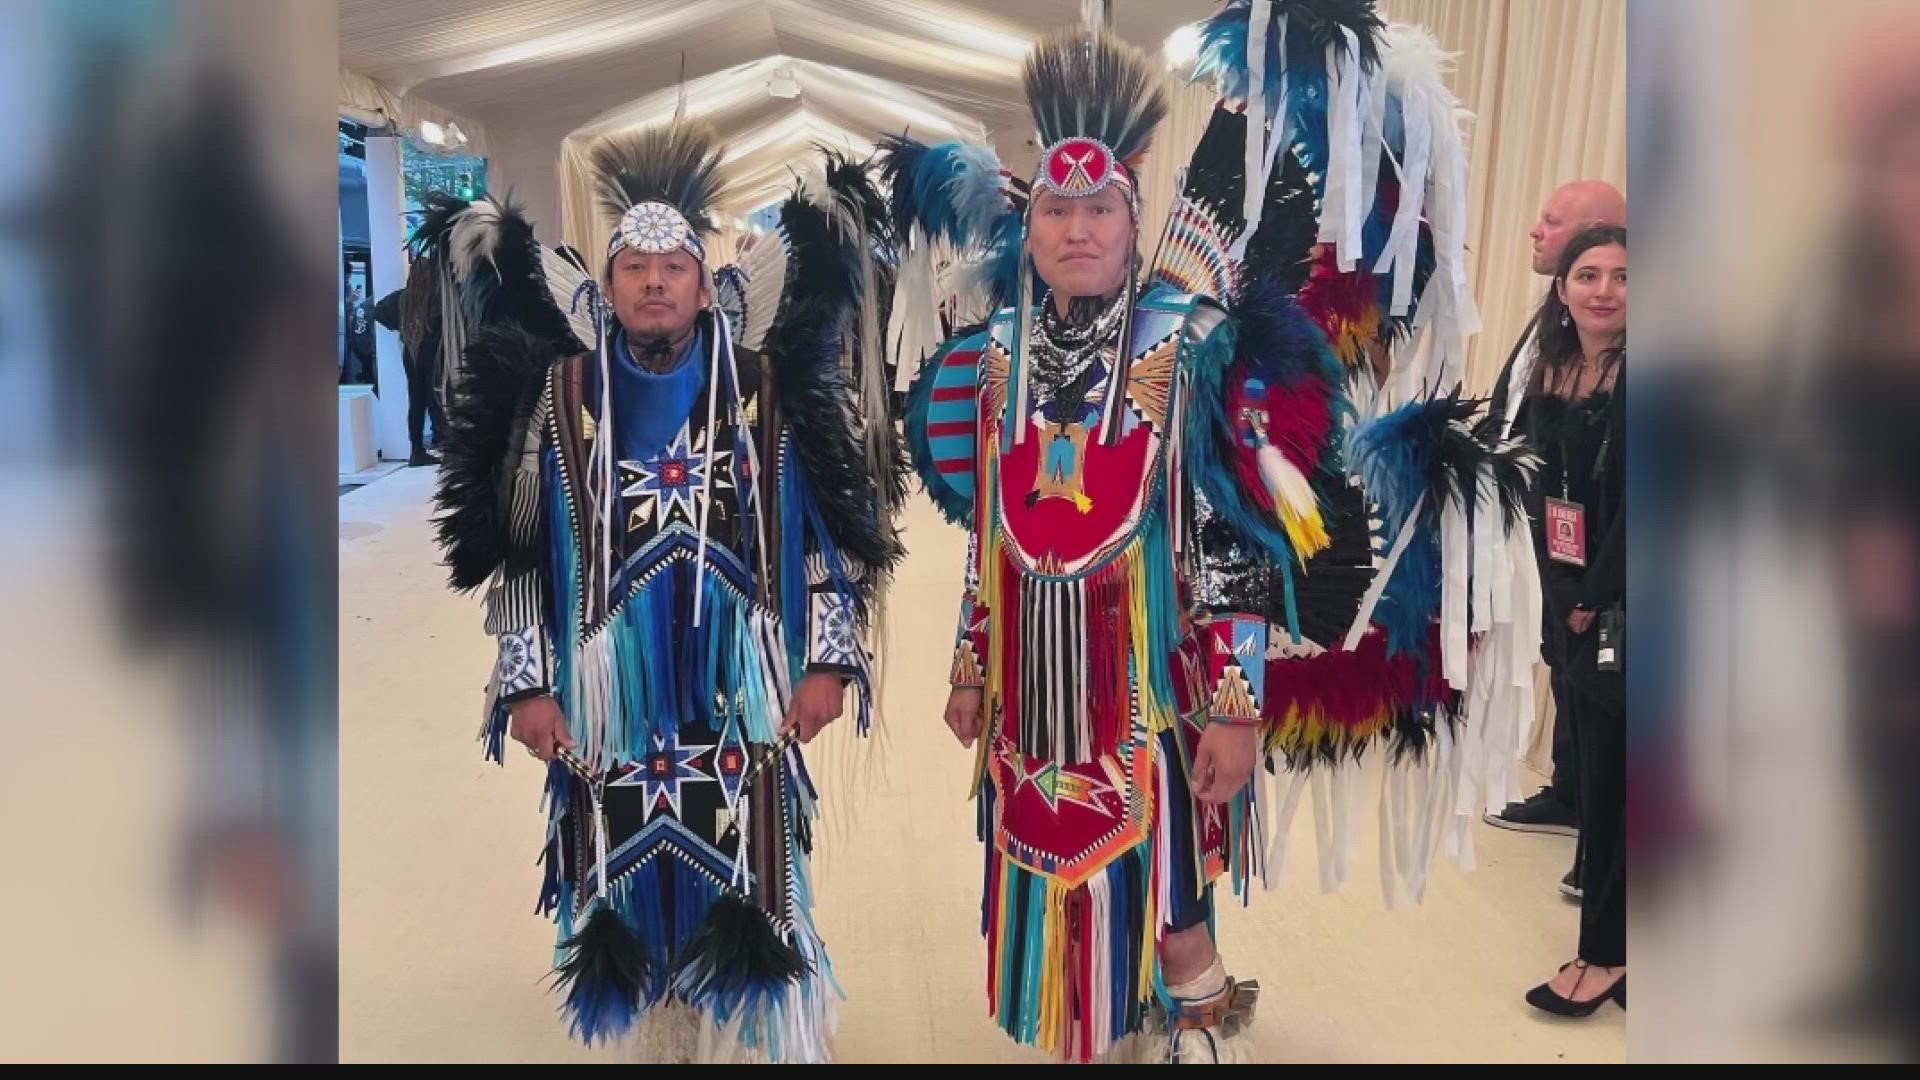 How do you get from the Navajo Nation to the Met Gala in NYC? If you're part of a dance troupe, you practice. Two members of Indigenous Enterprise did just that!